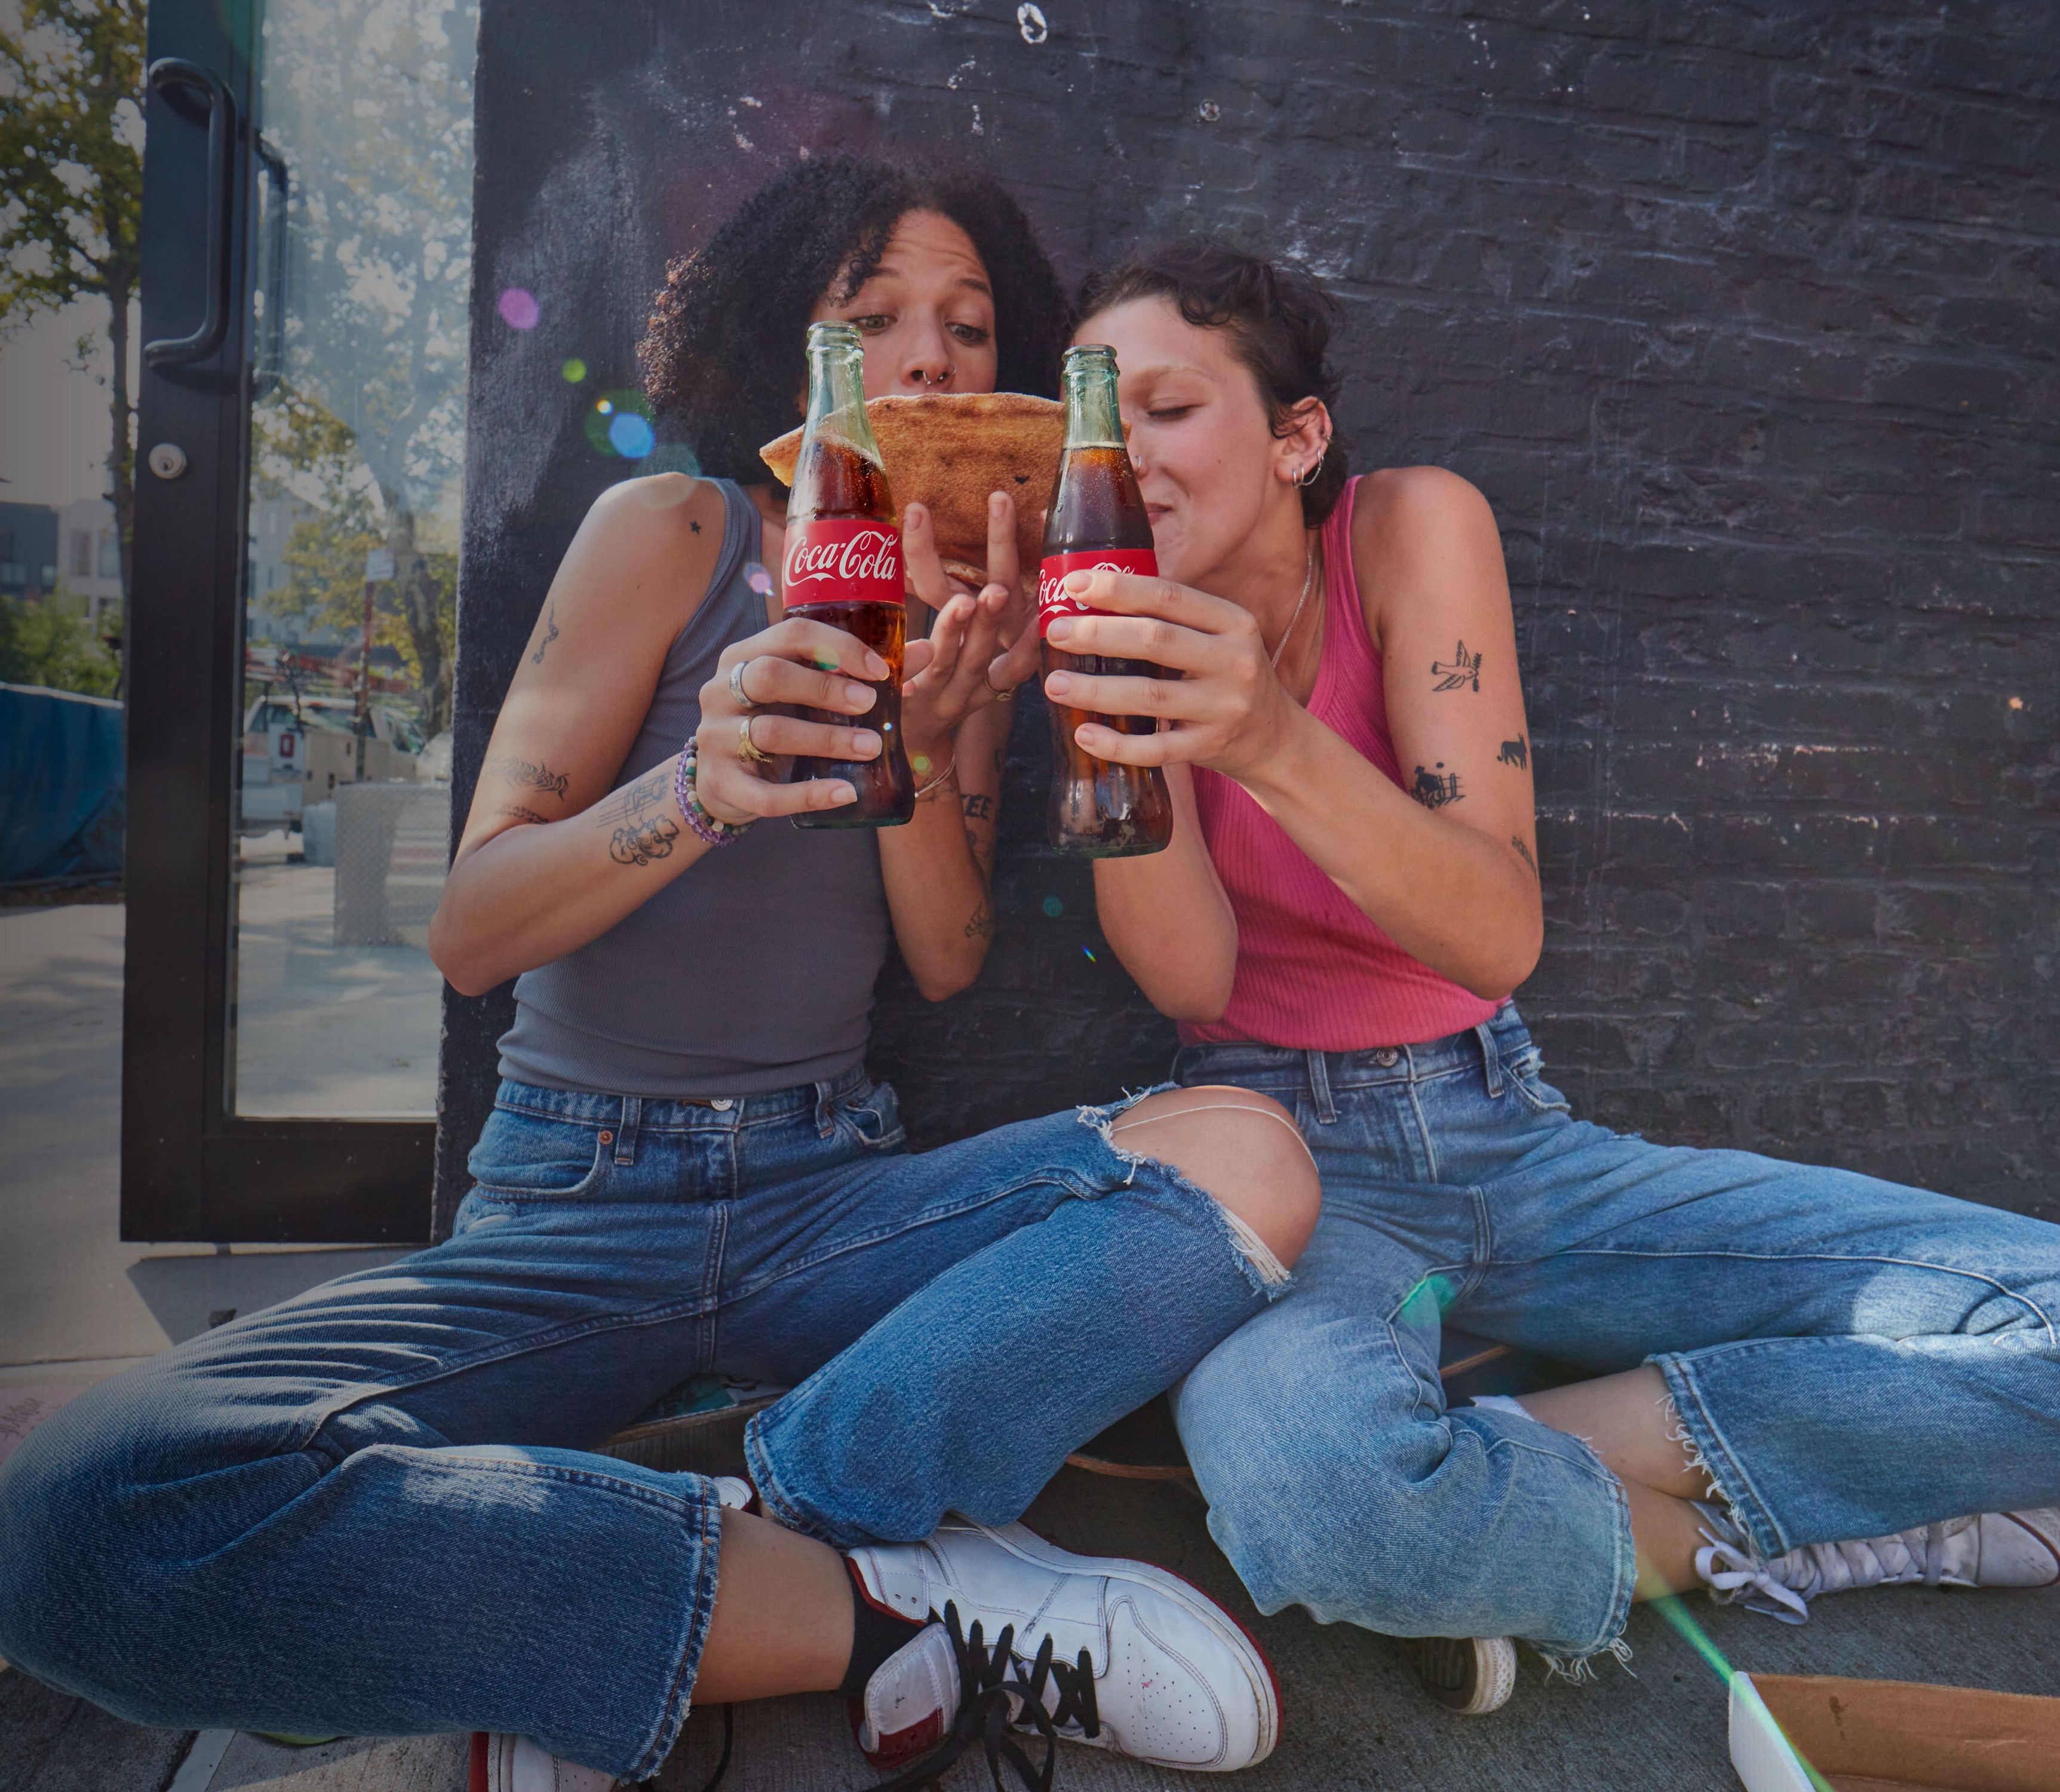 Two women enjoying pizza and Coca-Colas